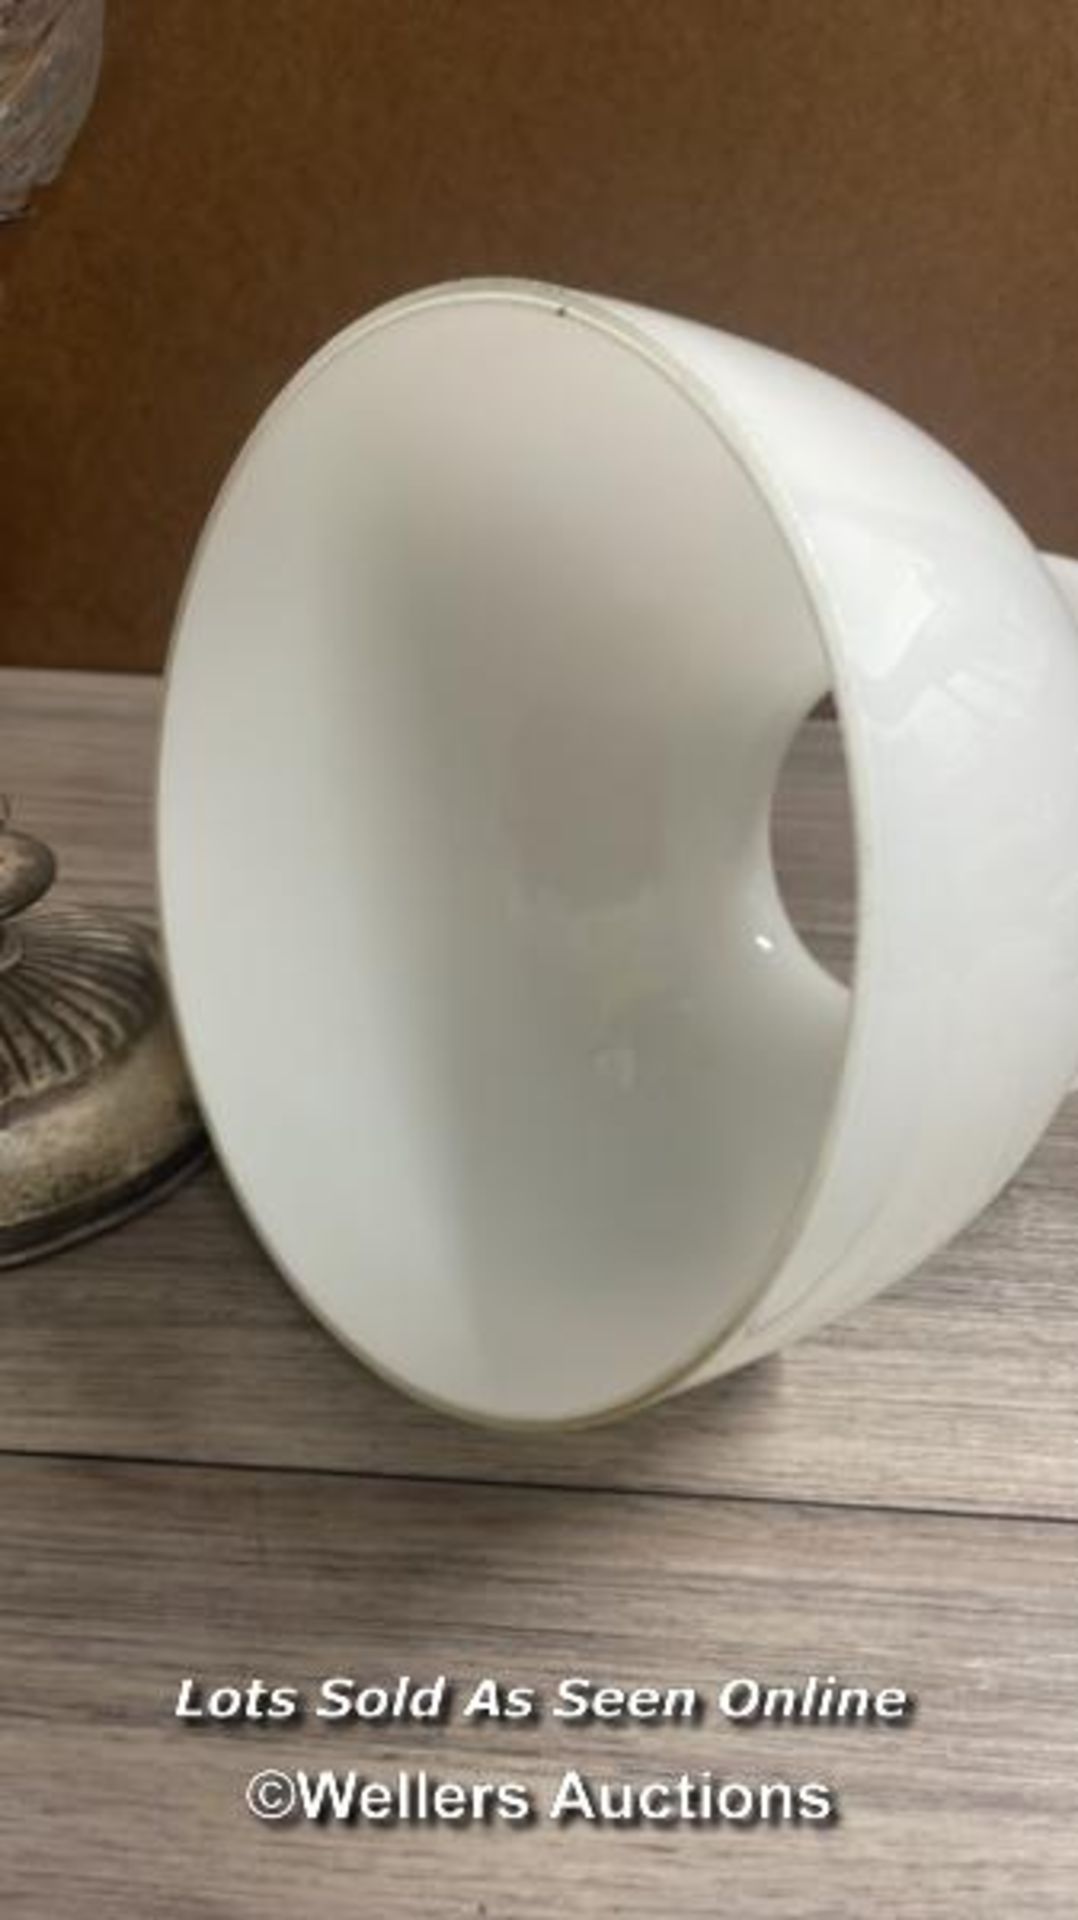 *METAL OIL LAMP WITH HEAVY GLASS RESERVOIR AND MILK GLASS SHADE - Image 8 of 8